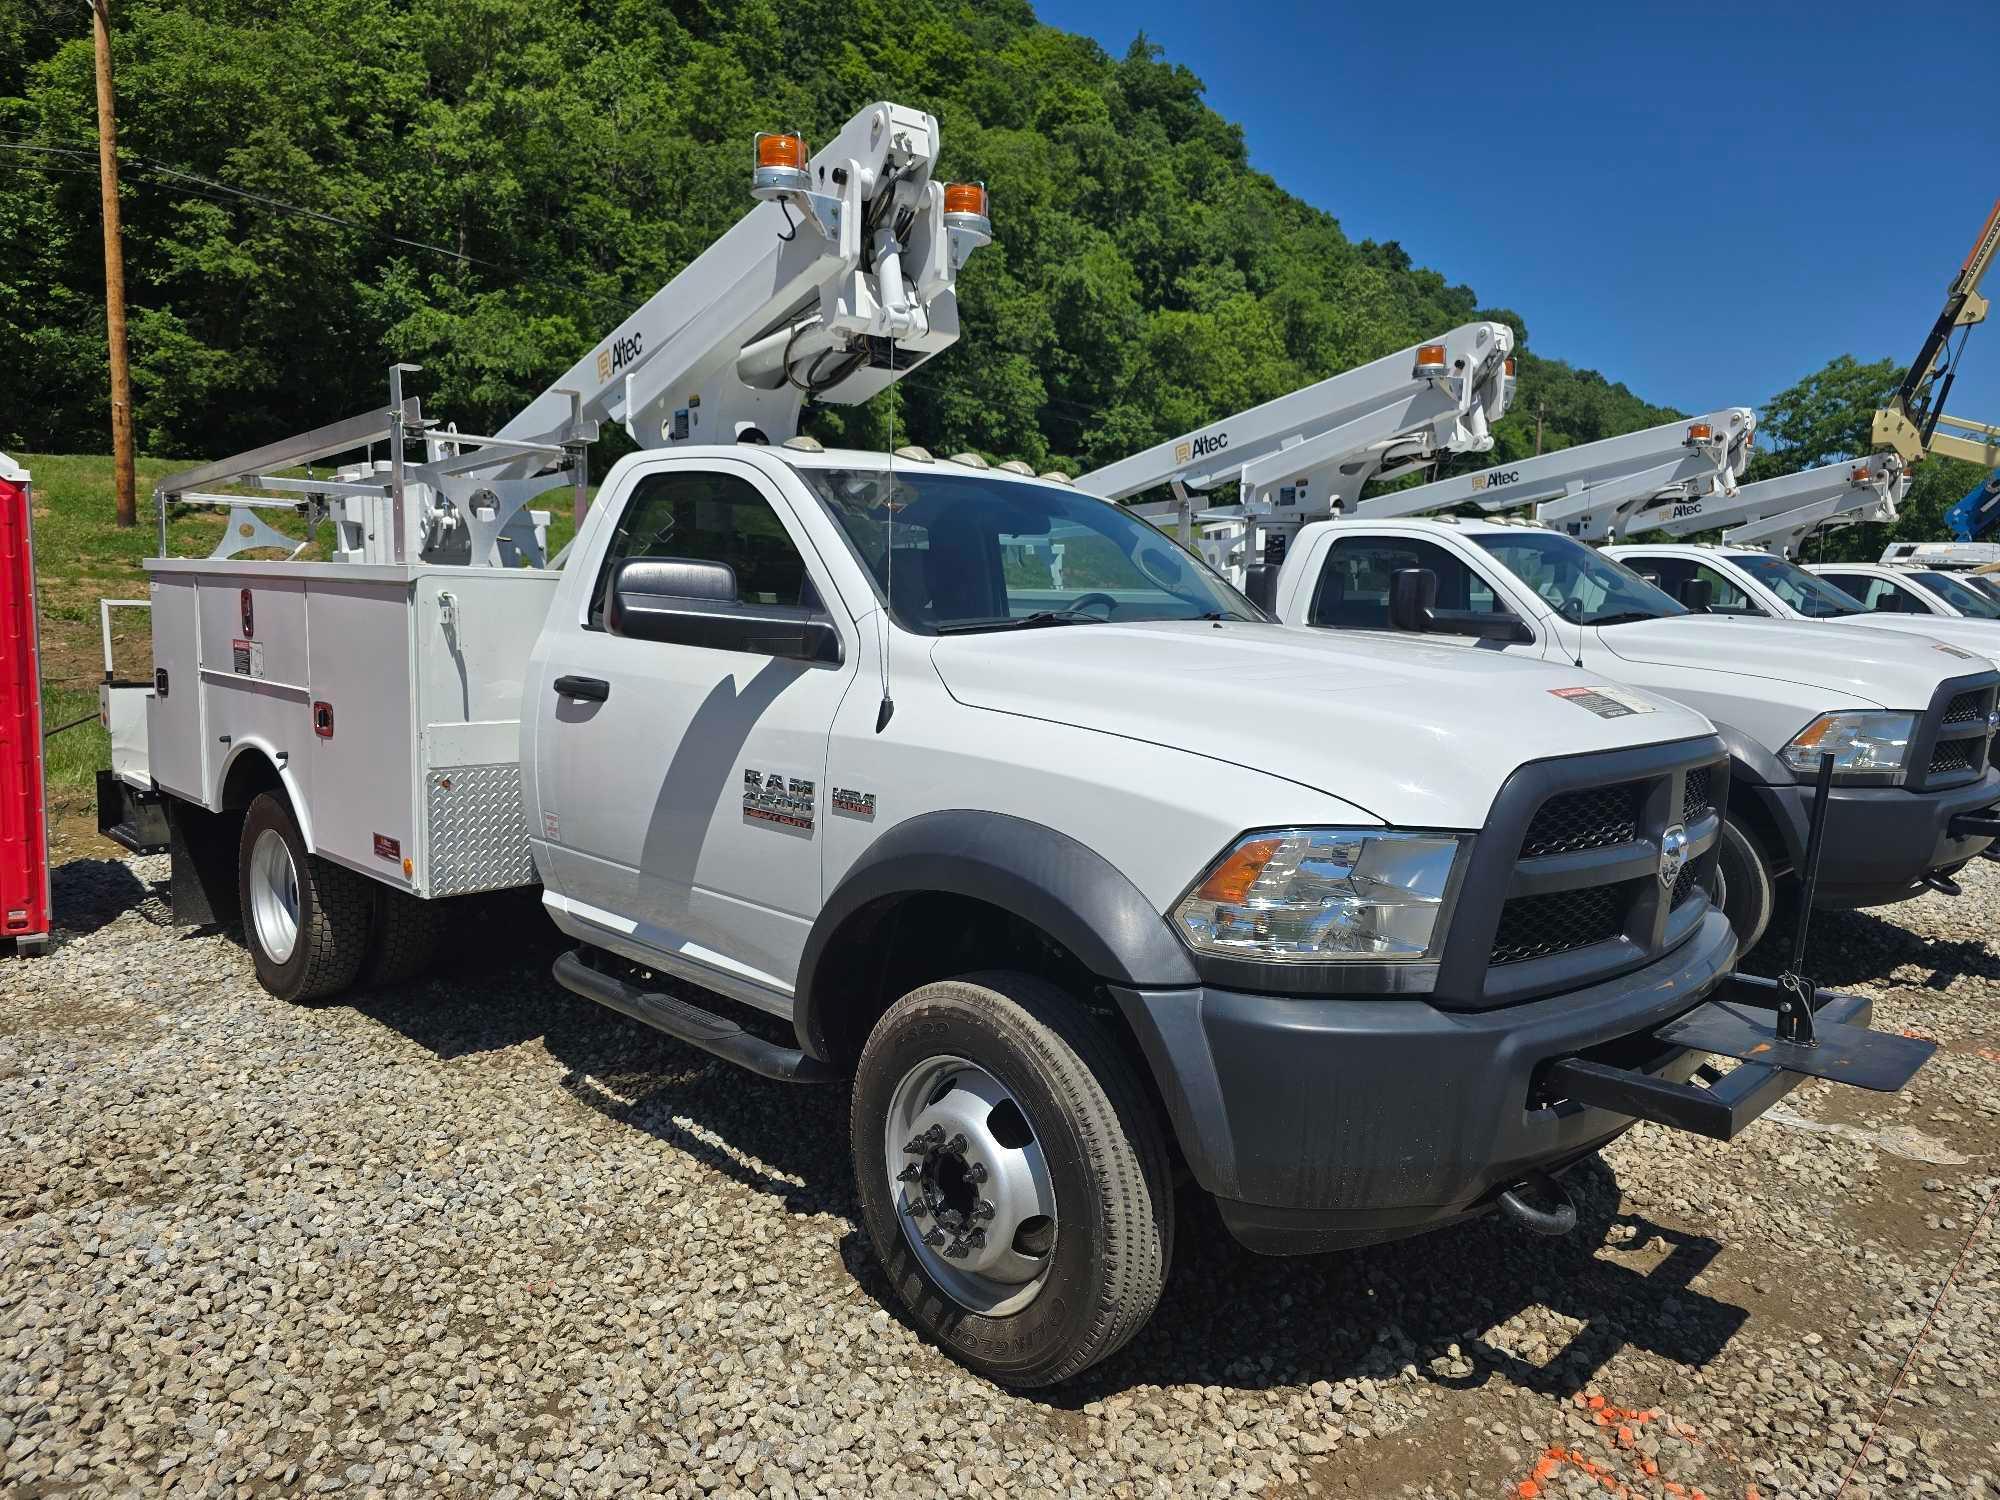 2016 DODGE 4500 BUCKET TRUCK VN:342997...powered by 6.4L Hemi gas engine, equipped with Allison